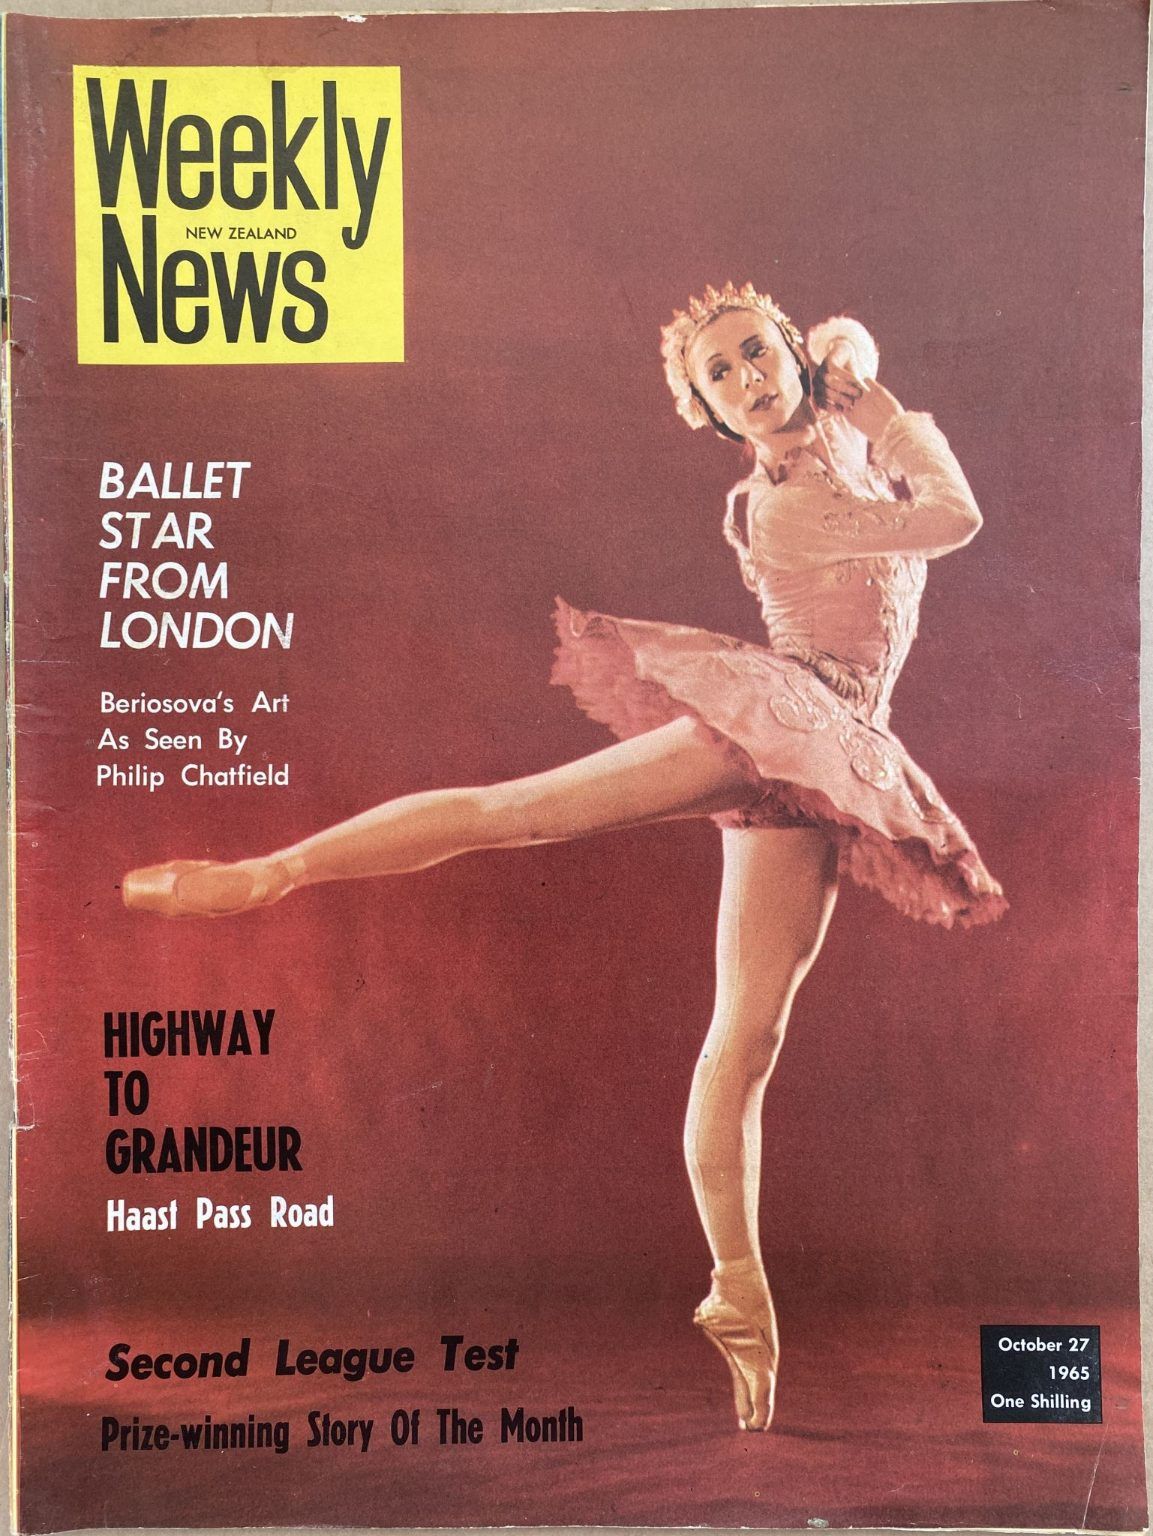 OLD NEWSPAPER: New Zealand Weekly News, No. 5318, 27 October 1965